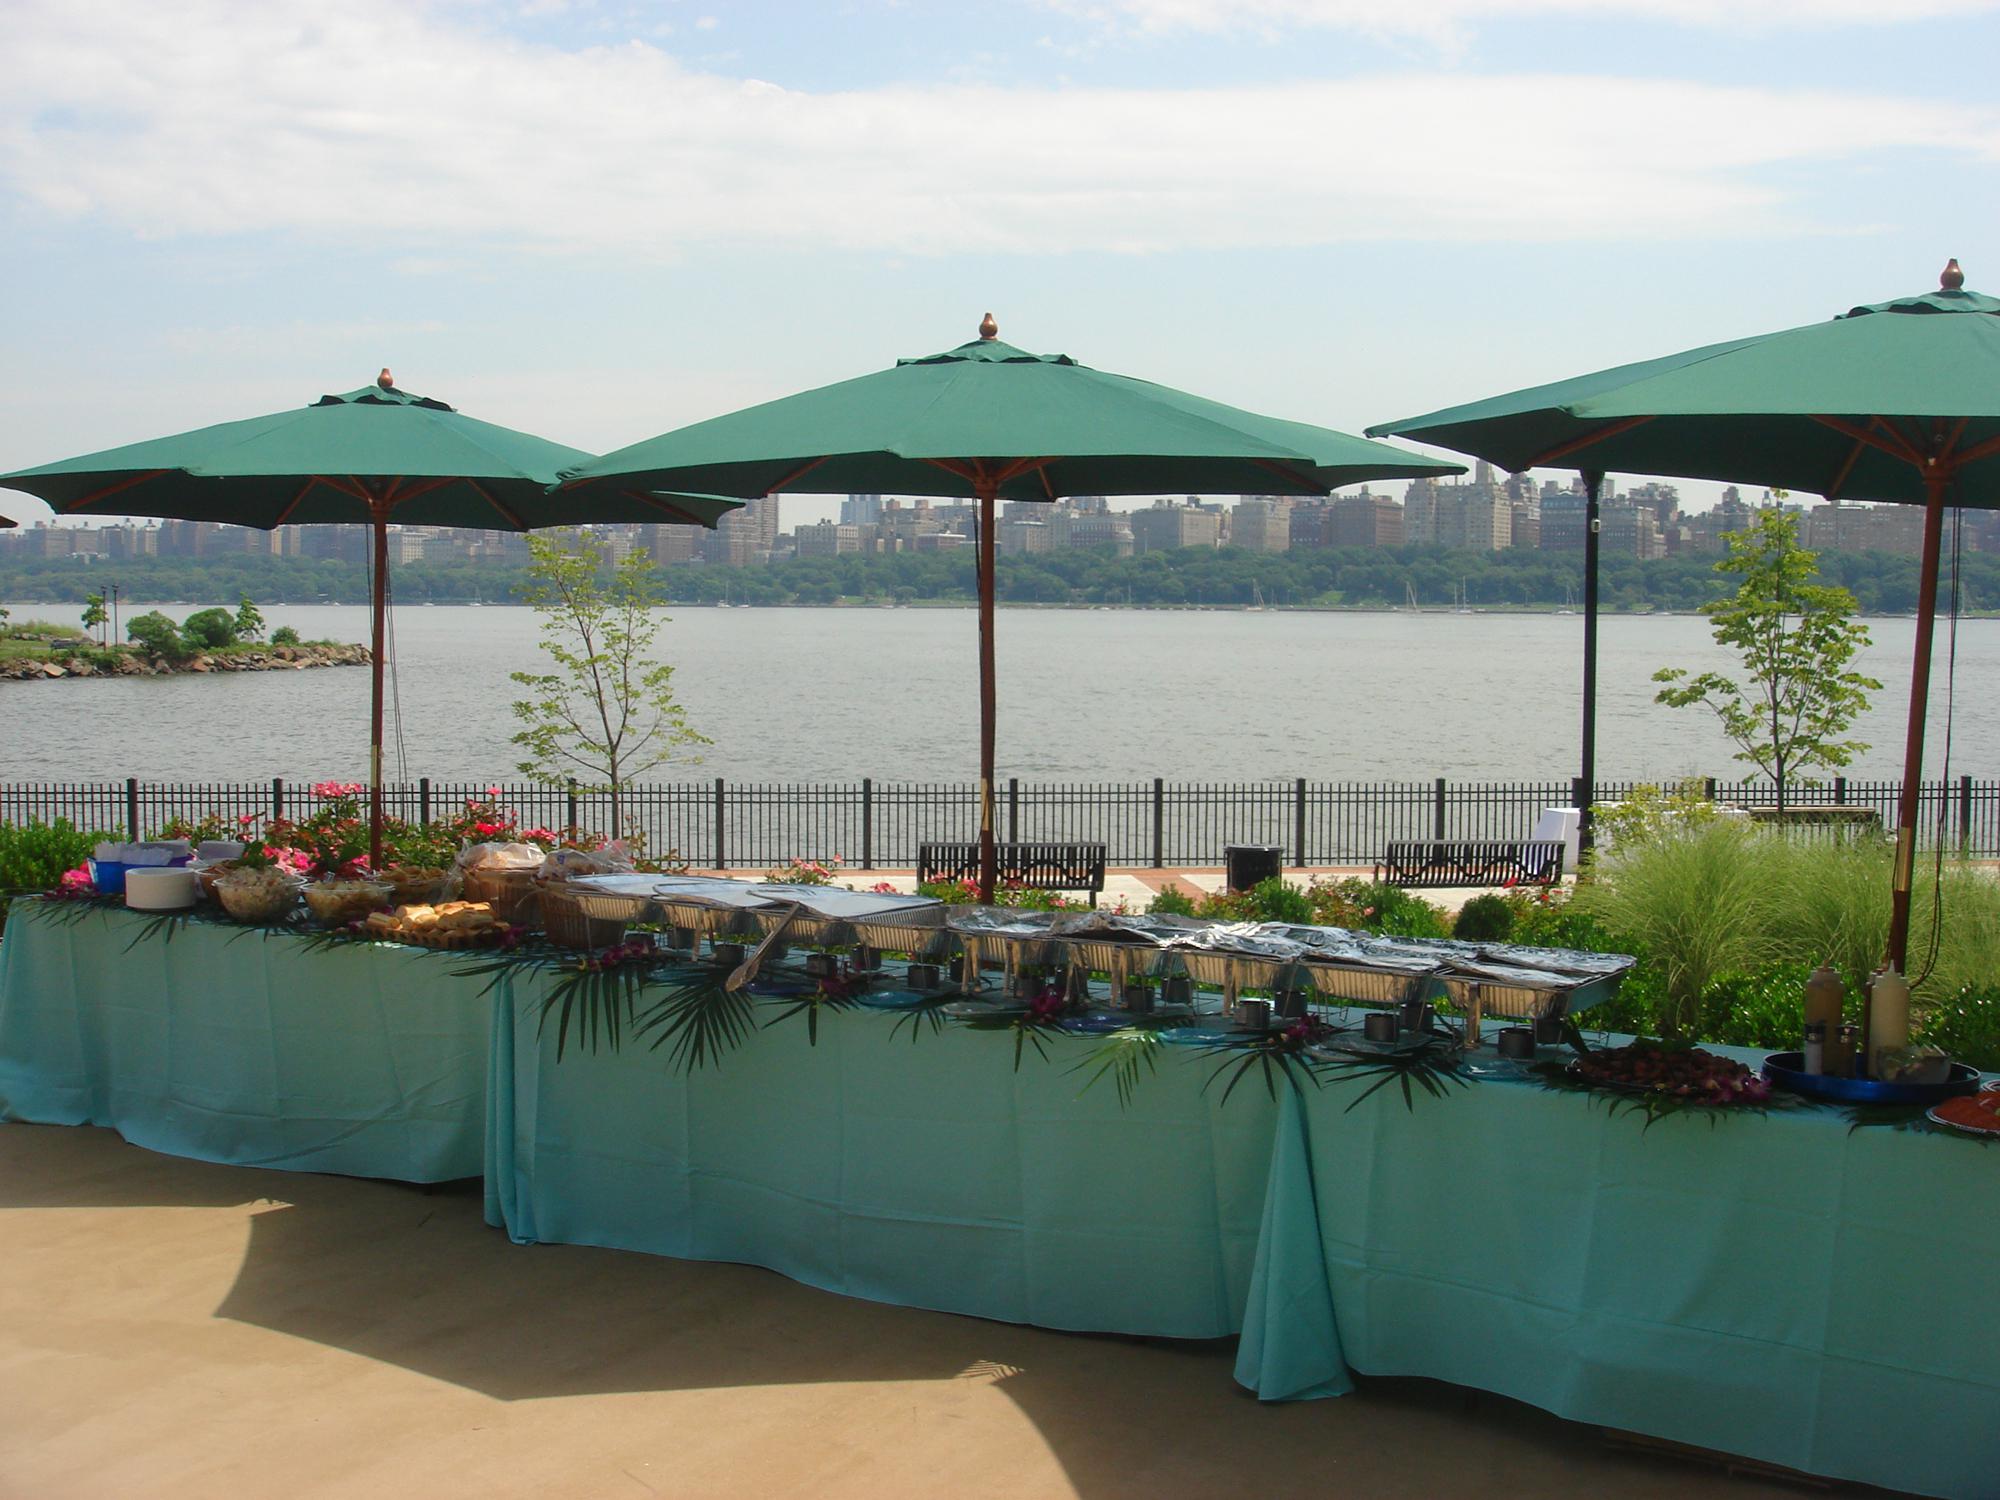 Catering setup by the bay